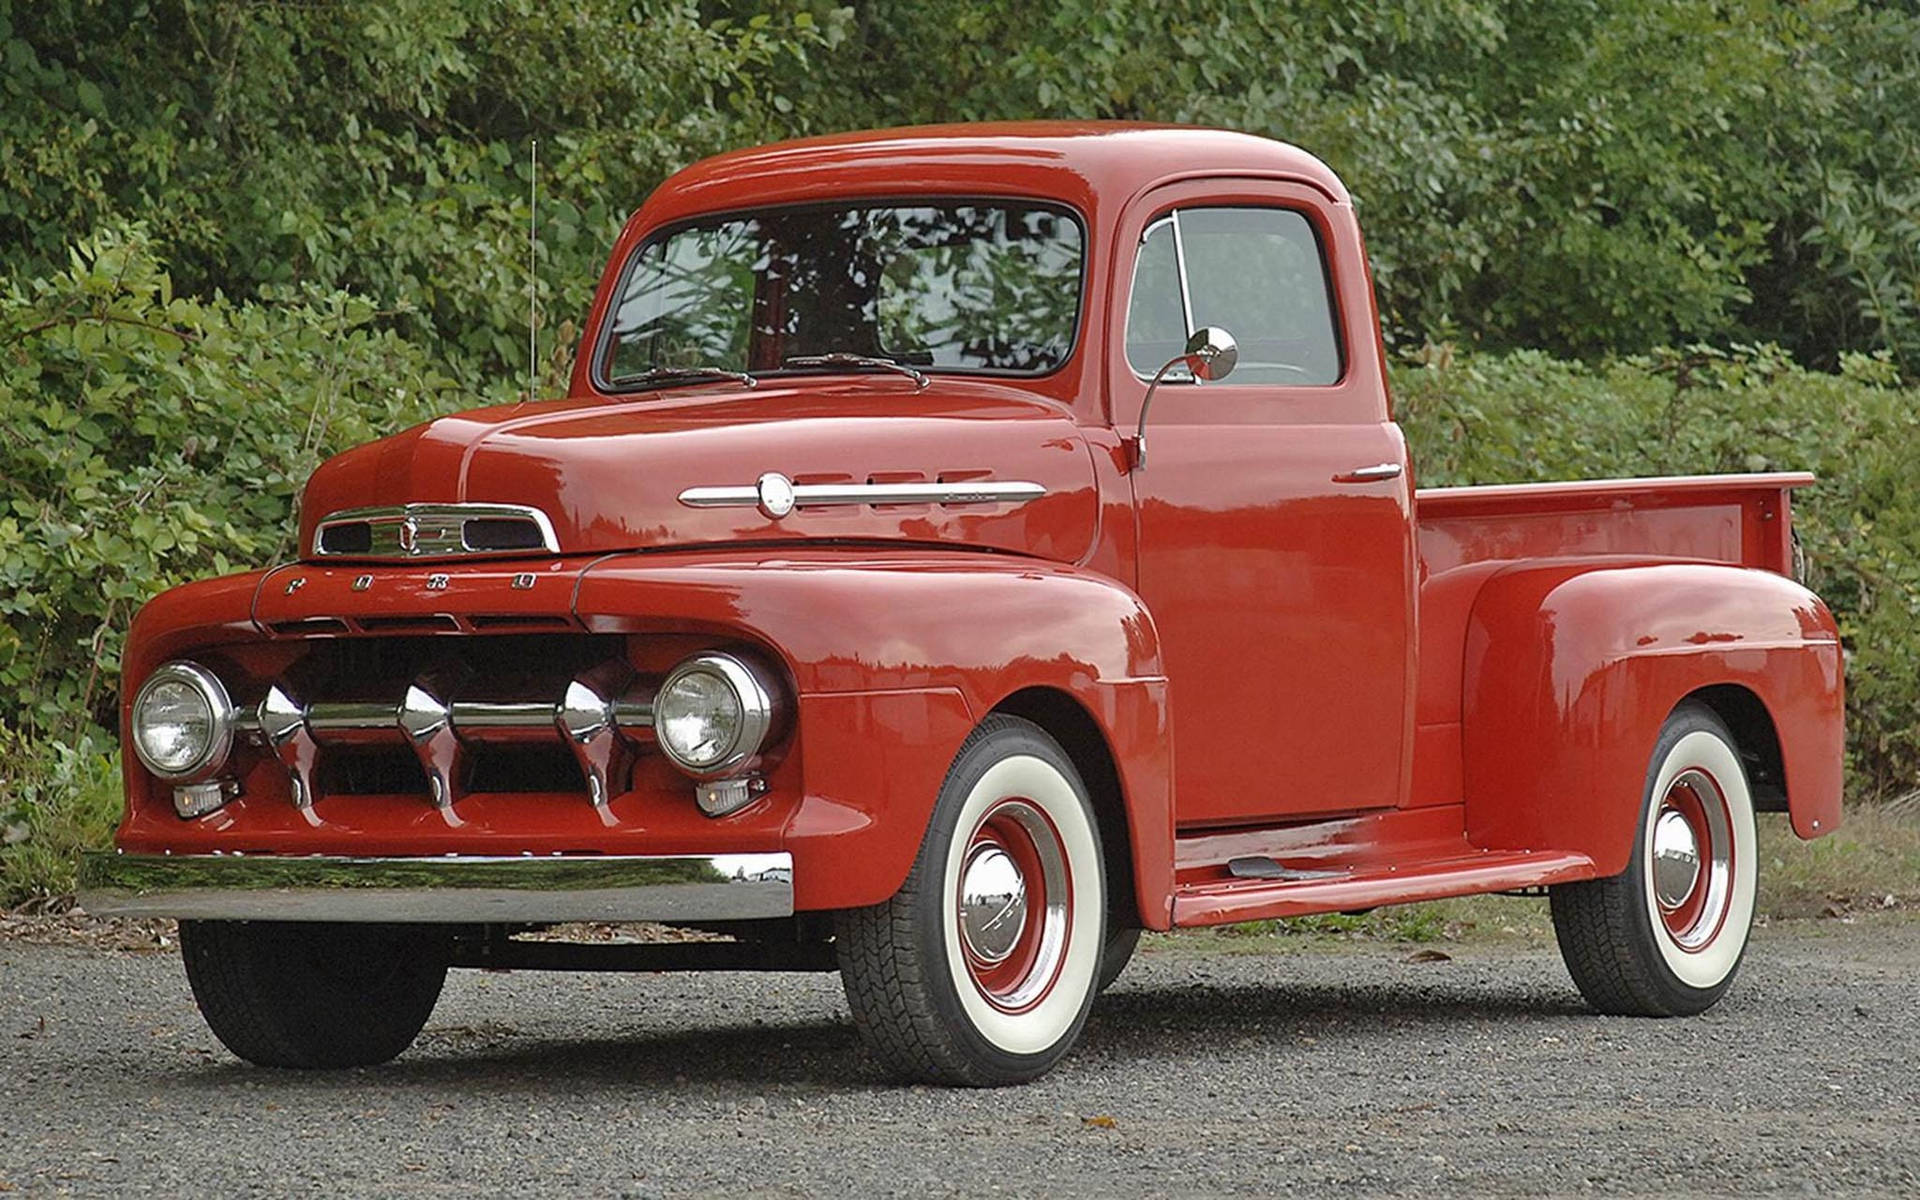 First Generation Old Ford Truck Background